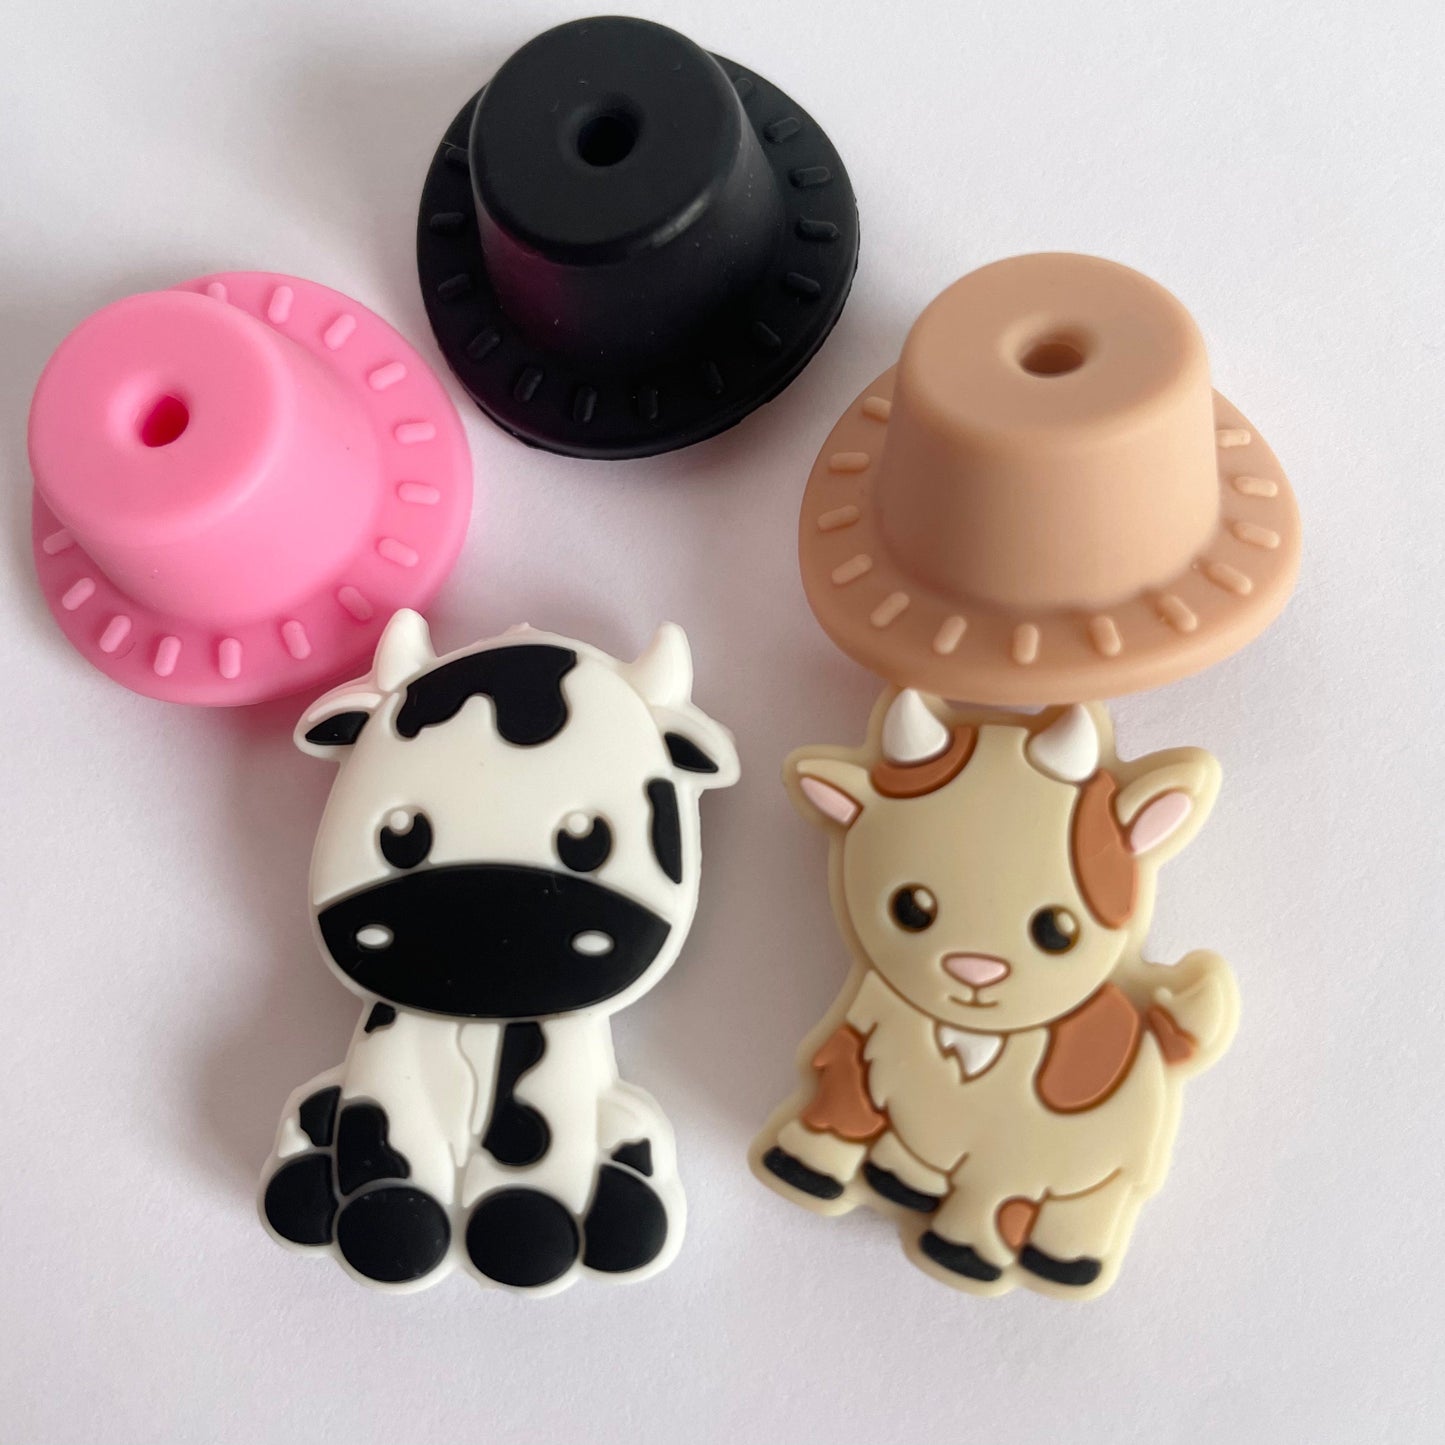 Cute Goat & Cow & Cowgirl Hats Focal Silicone Beads, Goat Silicone Focals, Silicone Beads, Farm Silicone Beads, Tan Silicone Focal Beads, Farm Animals Silicone Focal Beads, Focal Beads, Focal Silicone Beads, Beads for Crafting